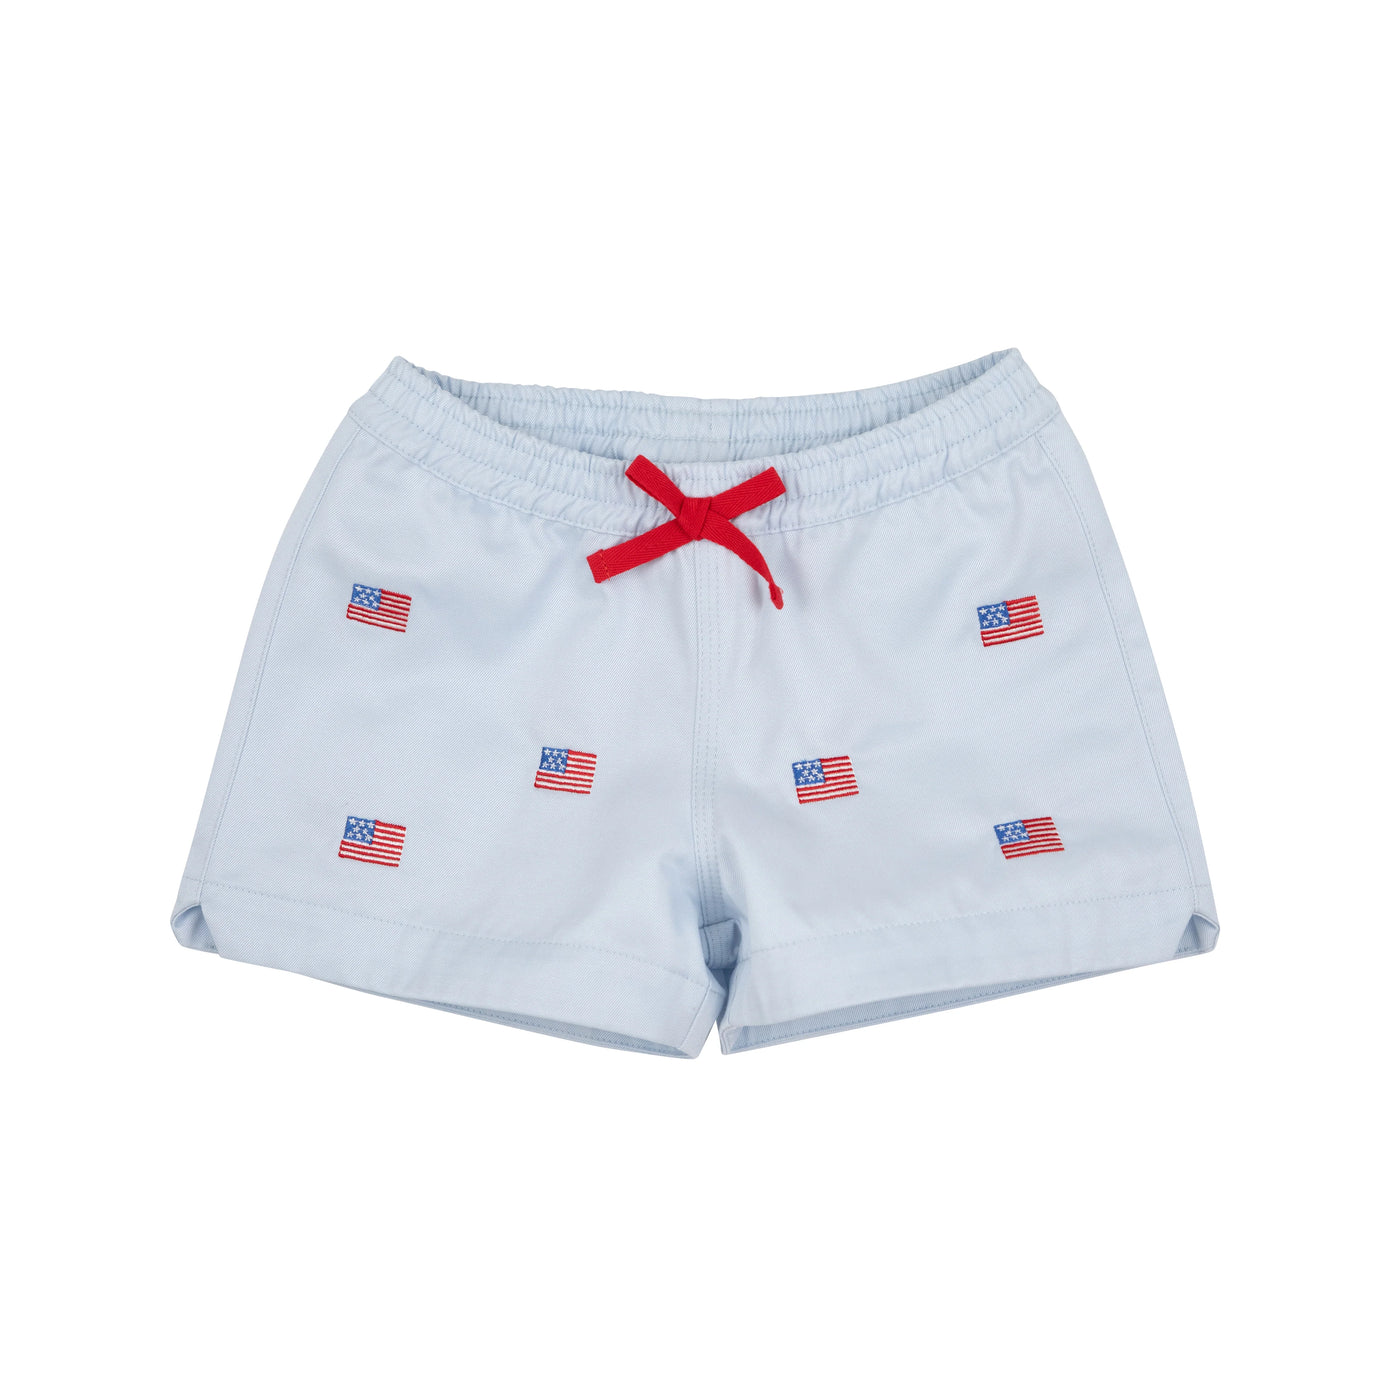 Critter Cheryl Shorts Buckhead Blue & American Flag Embroidery With Richmond Red Bow